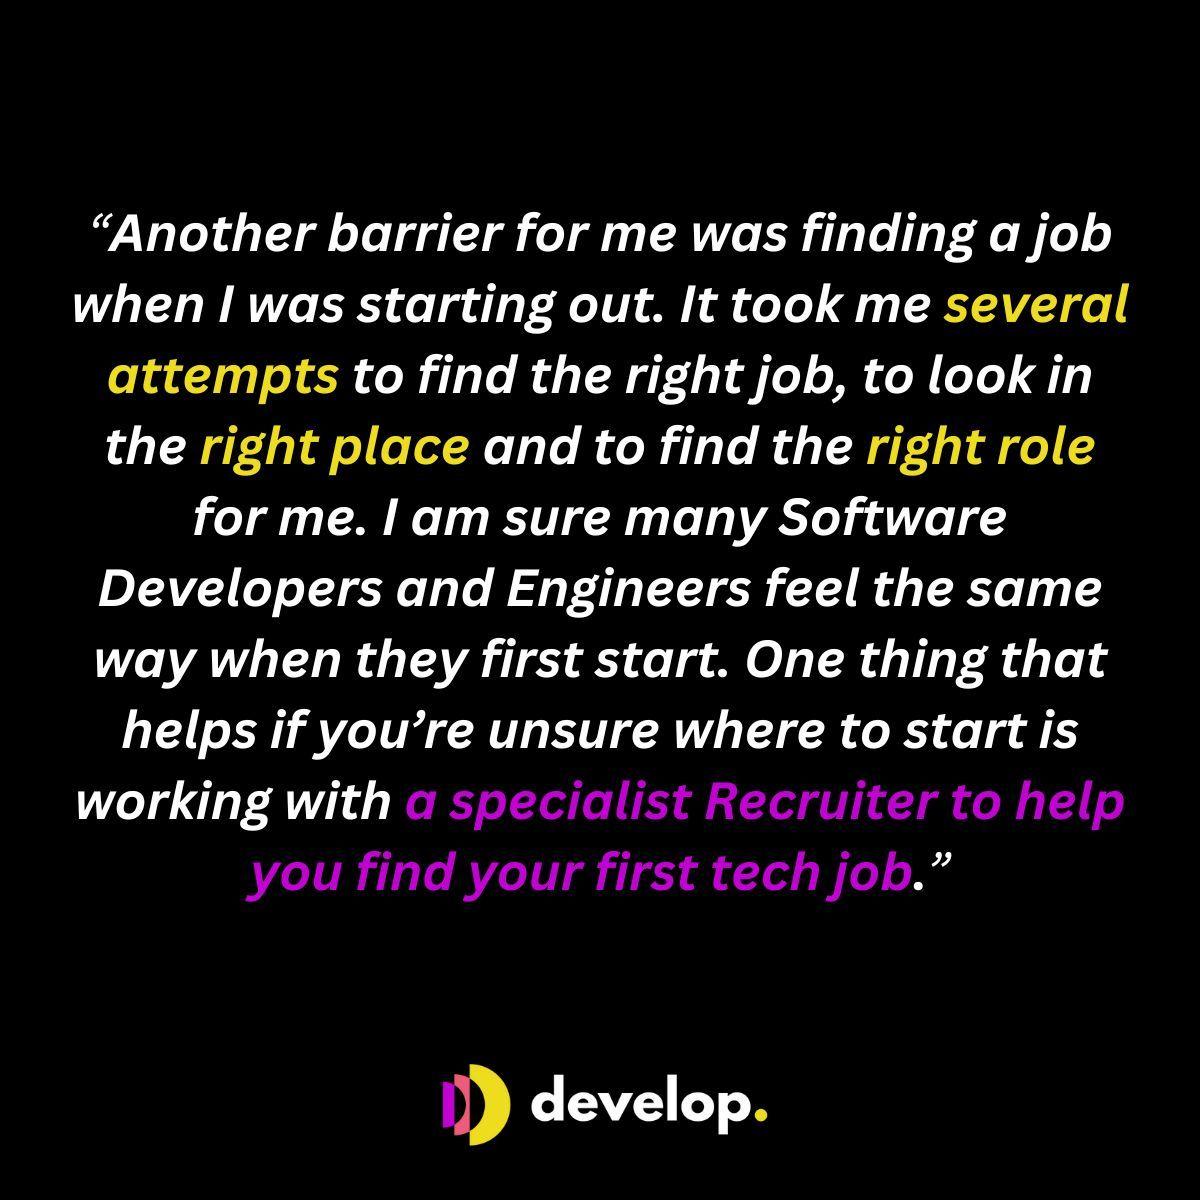 Seeking career advice? Look here! David Adams shares his journey and job-hunt struggles as a software developer. Catch our chat with him for valuable insights! #CareerTalk #DeveloperInsights buff.ly/44AQqsD